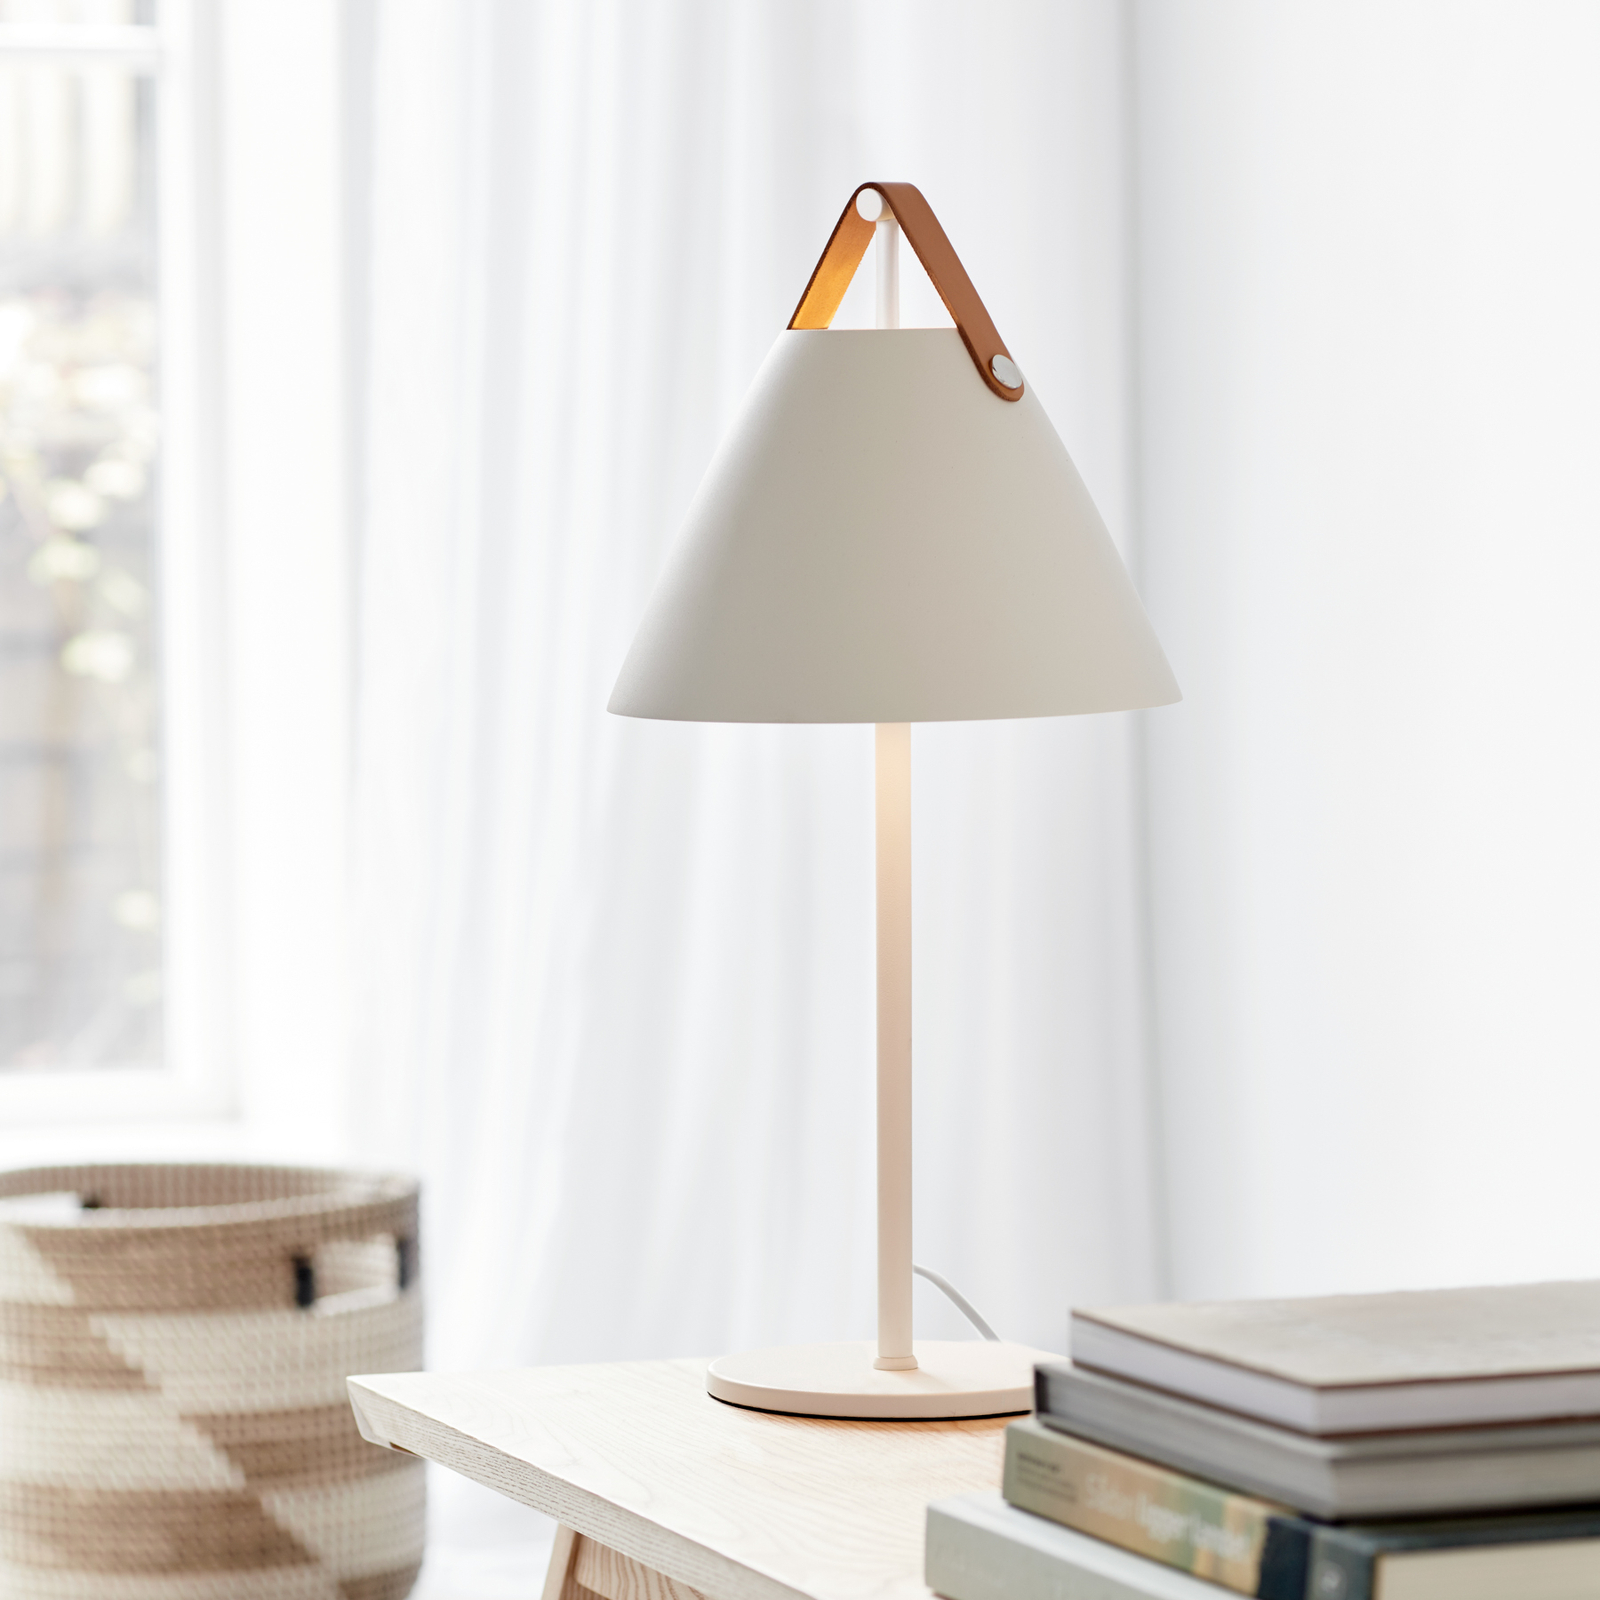 Metal table lamp Strap with leather strap, white